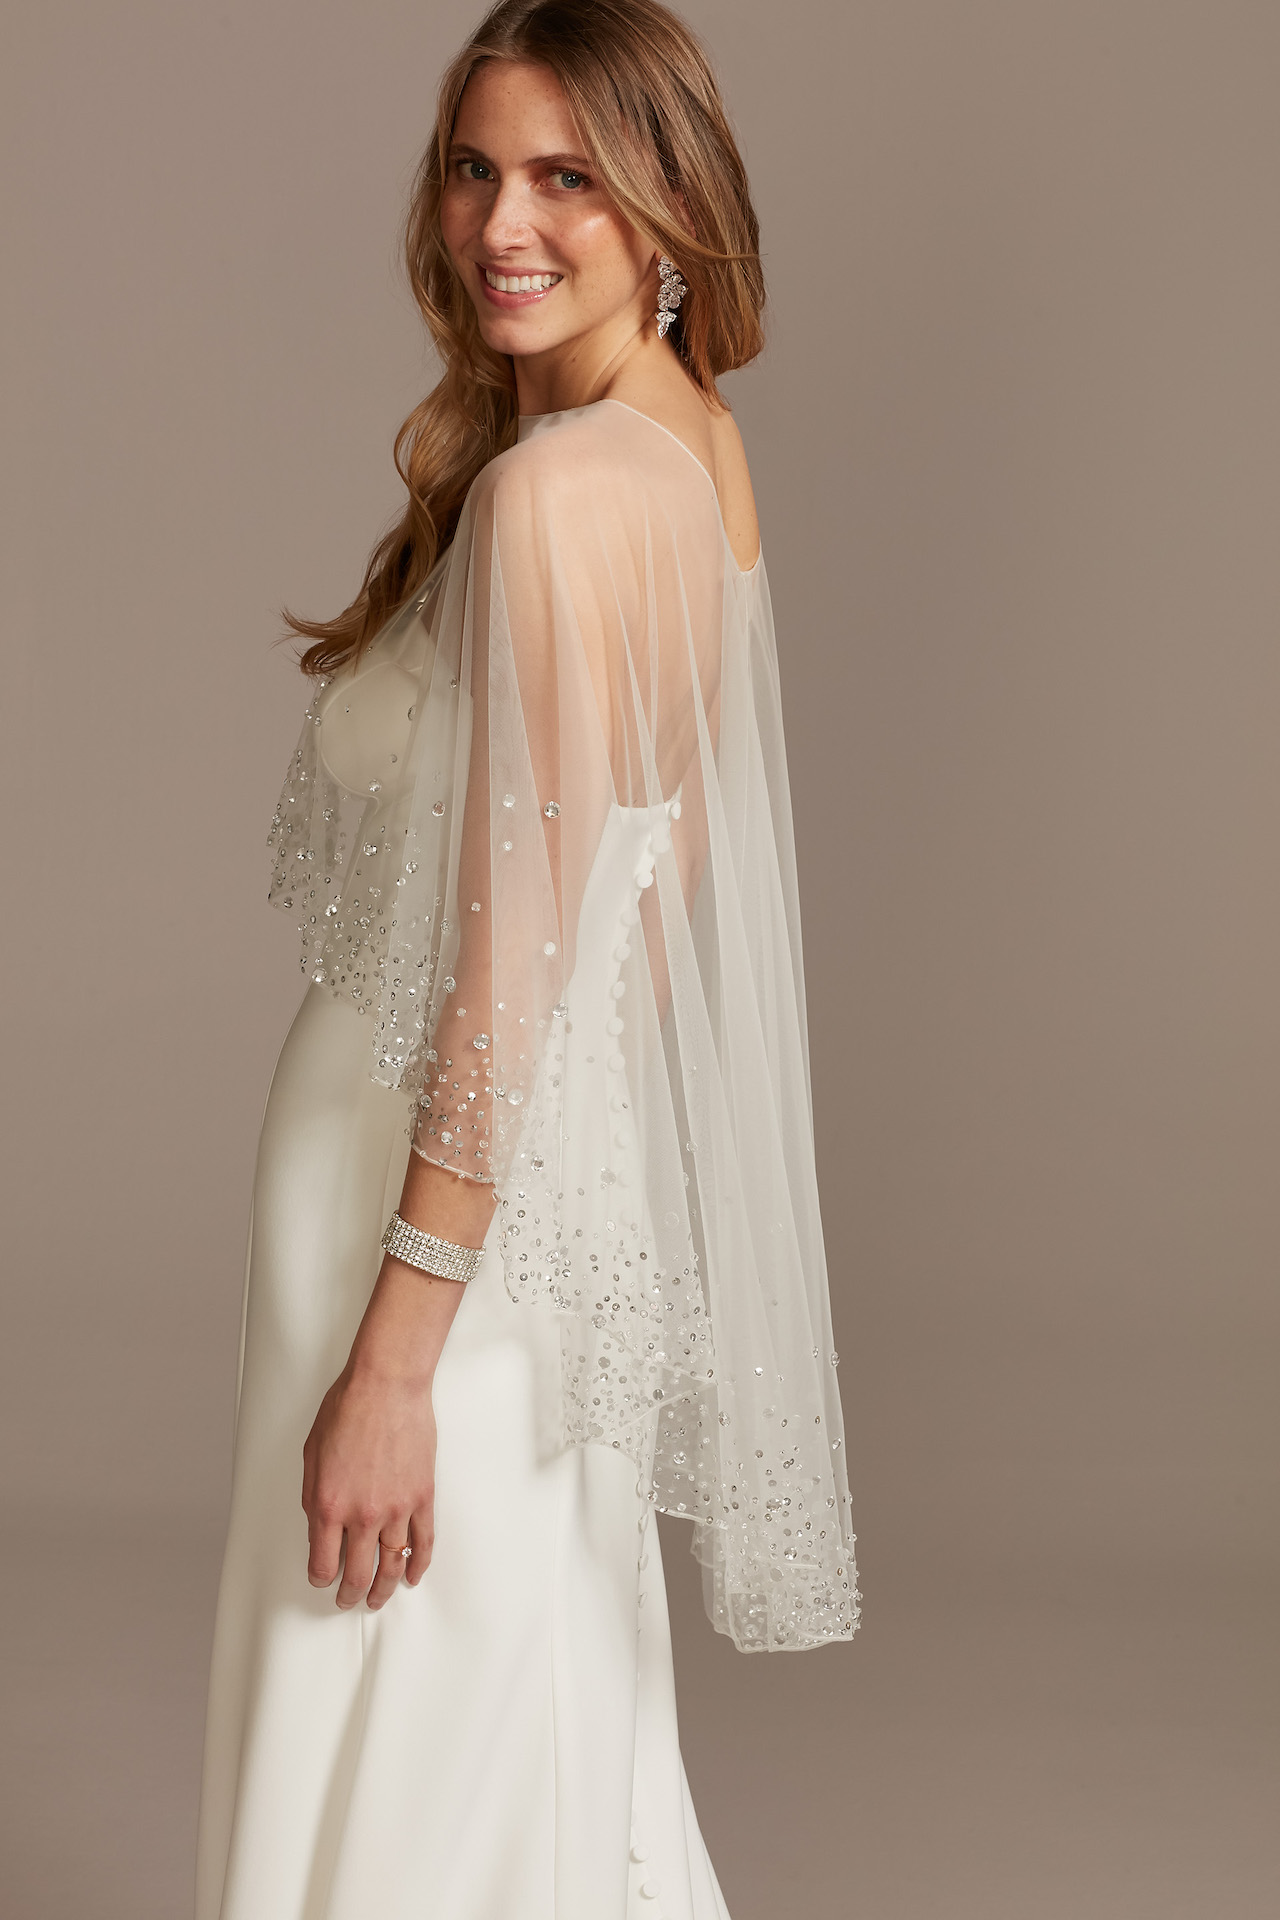 Top Off Your Look: Bridal Outerwear and Toppers | David's Bridal Blog